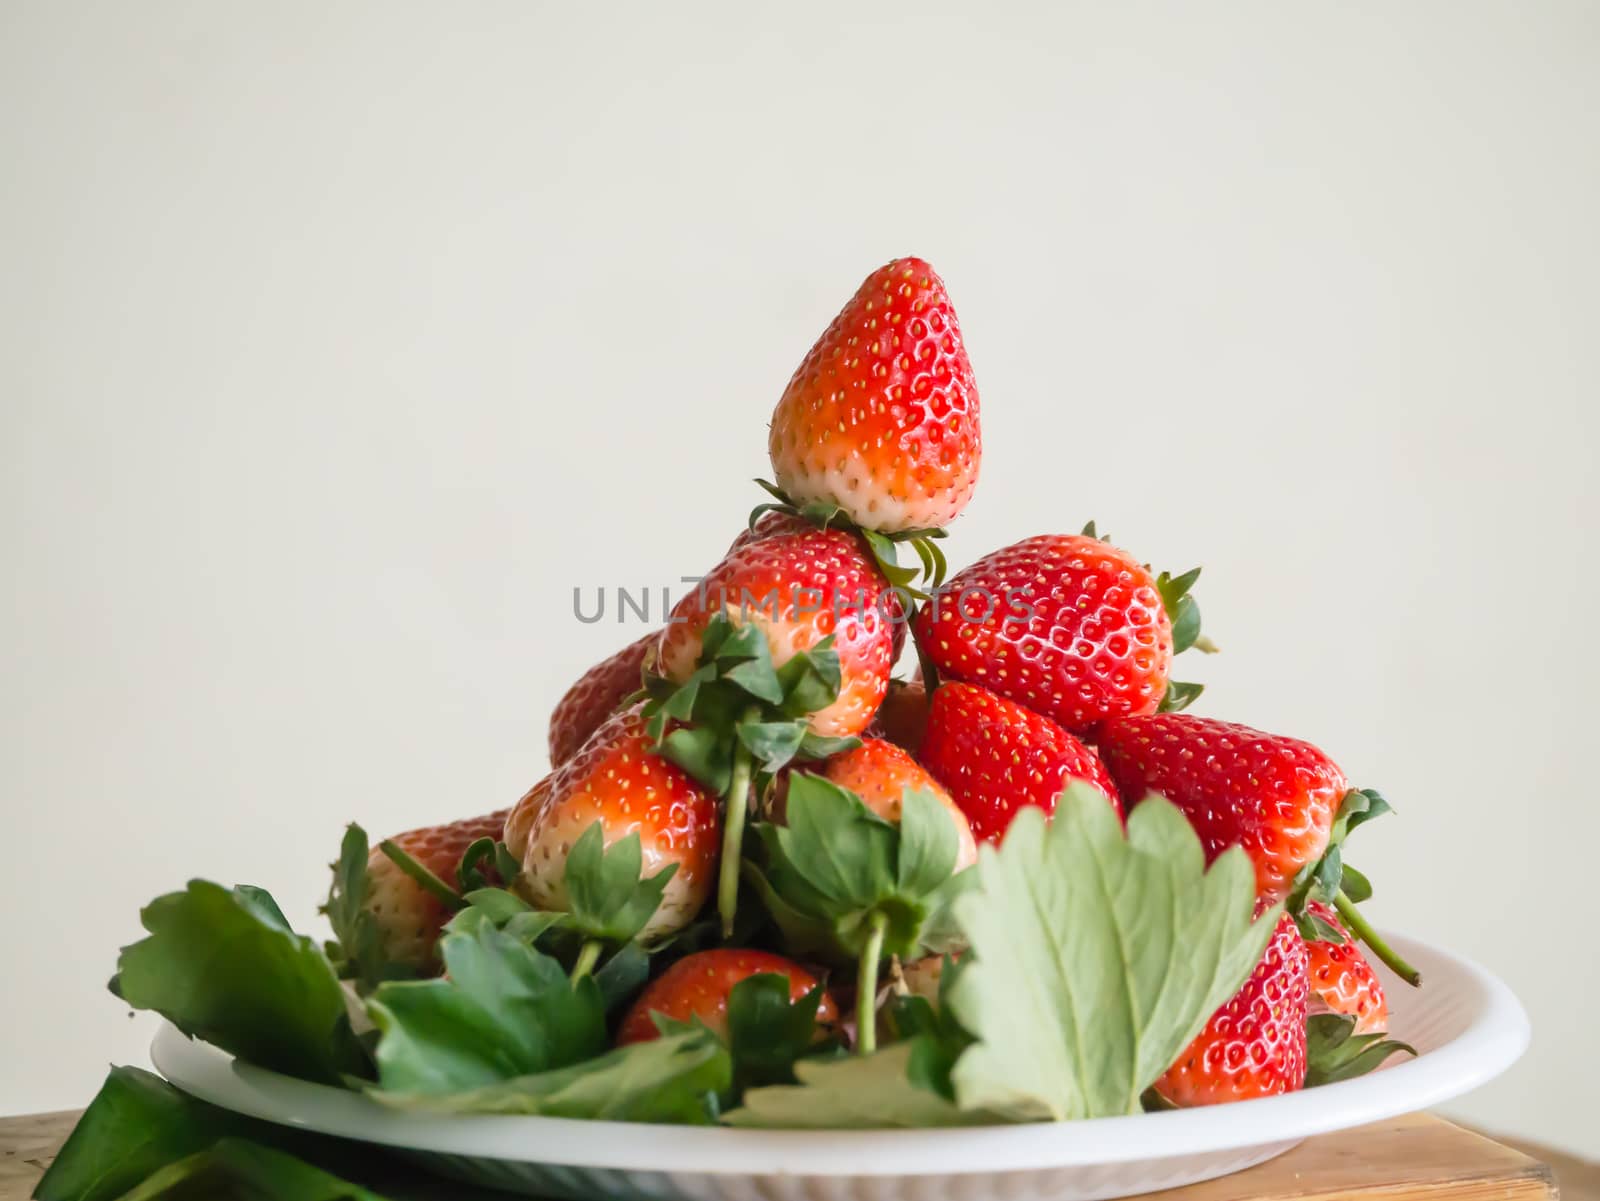 Strawberries in plat by nikky1972